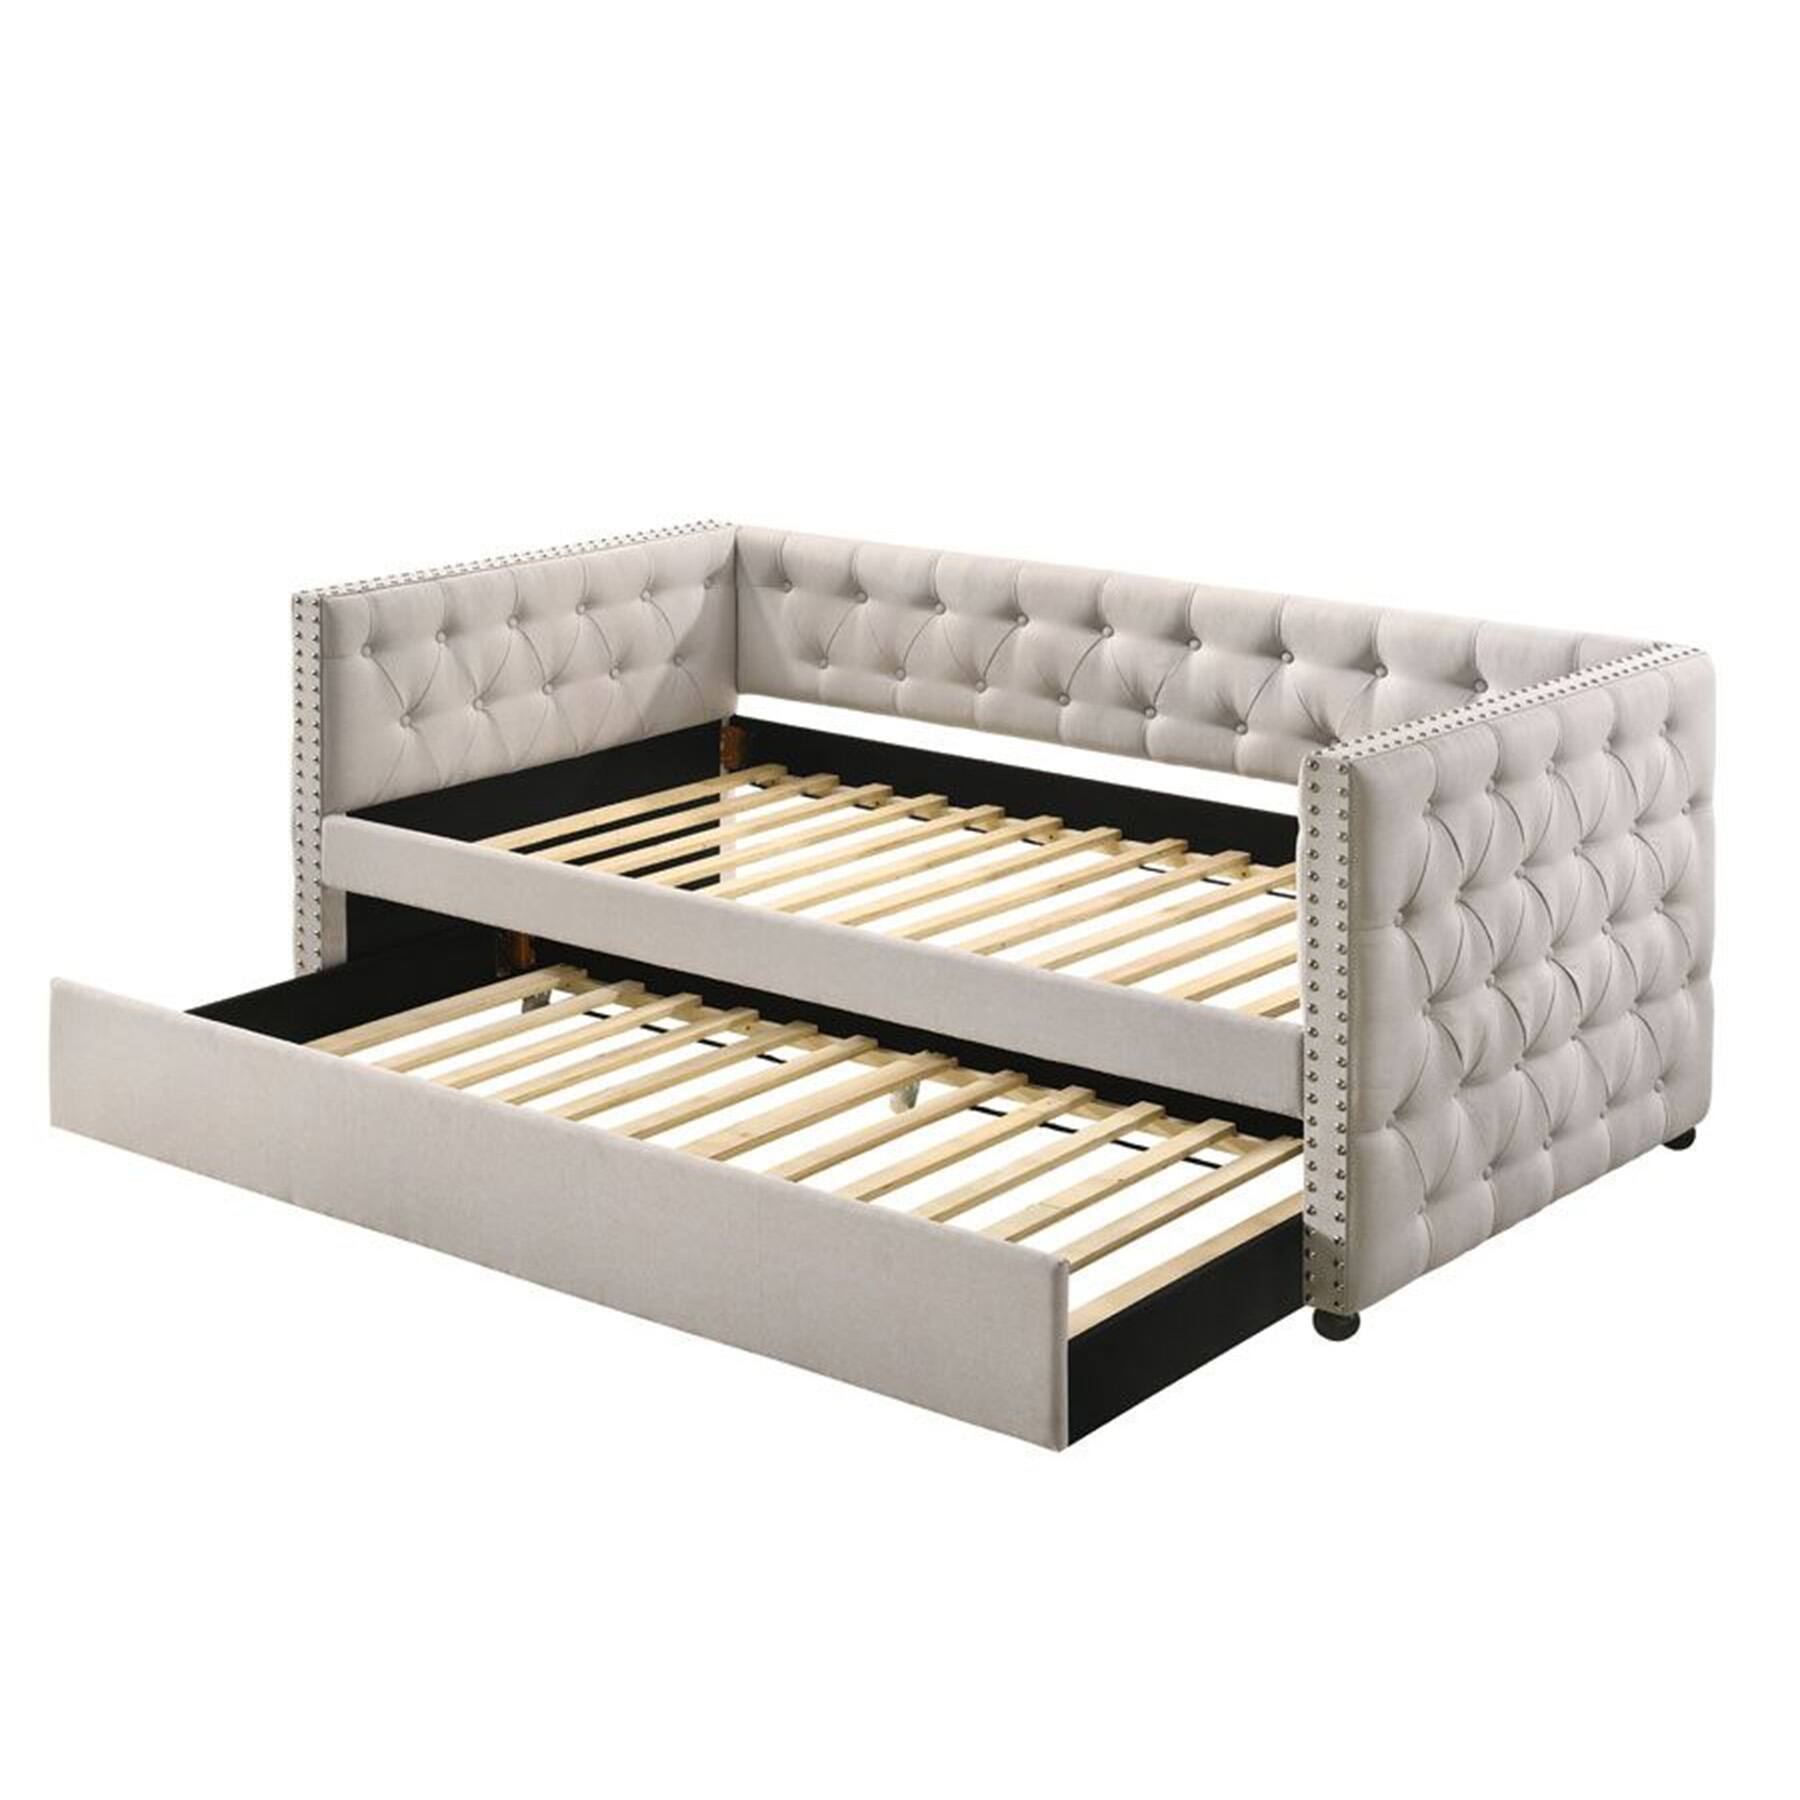 Upholstered Wooden Daybed, Bed Frame With Tufted Back And Trundle - Bed ...